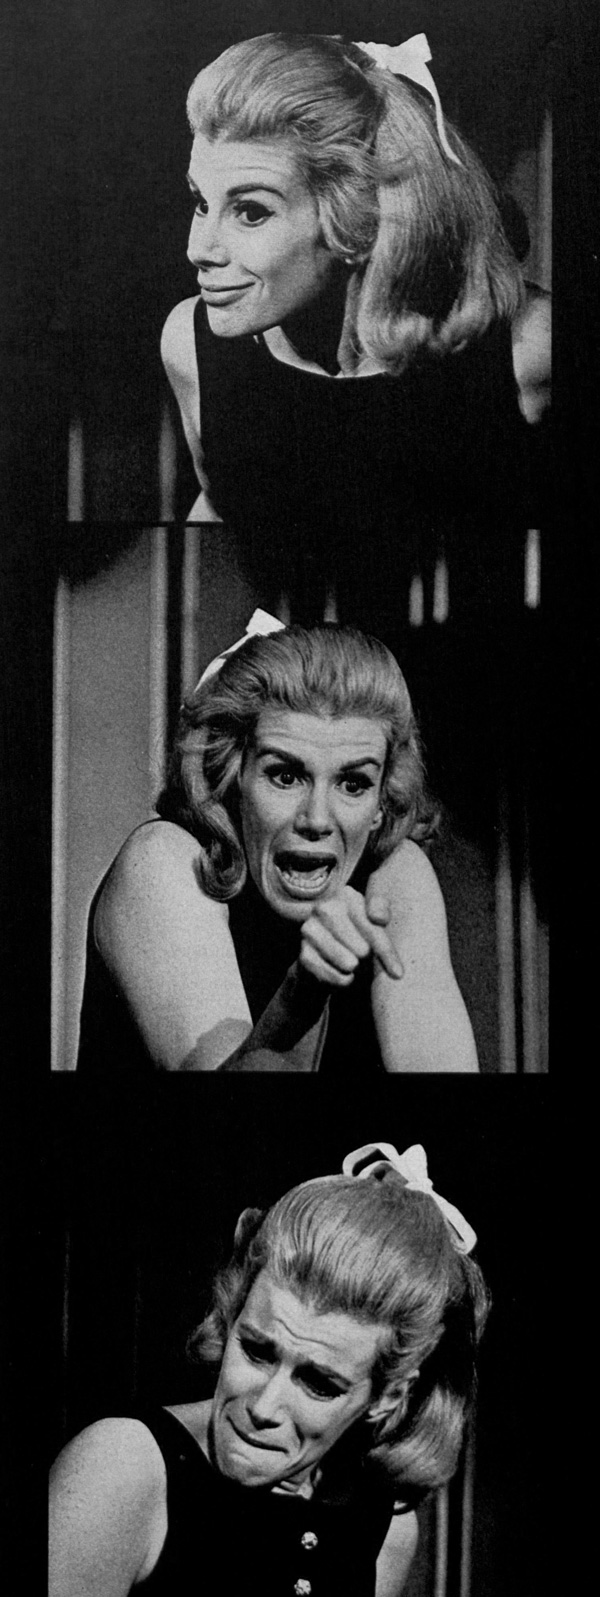 Joan Rivers performing stand-up in 1967